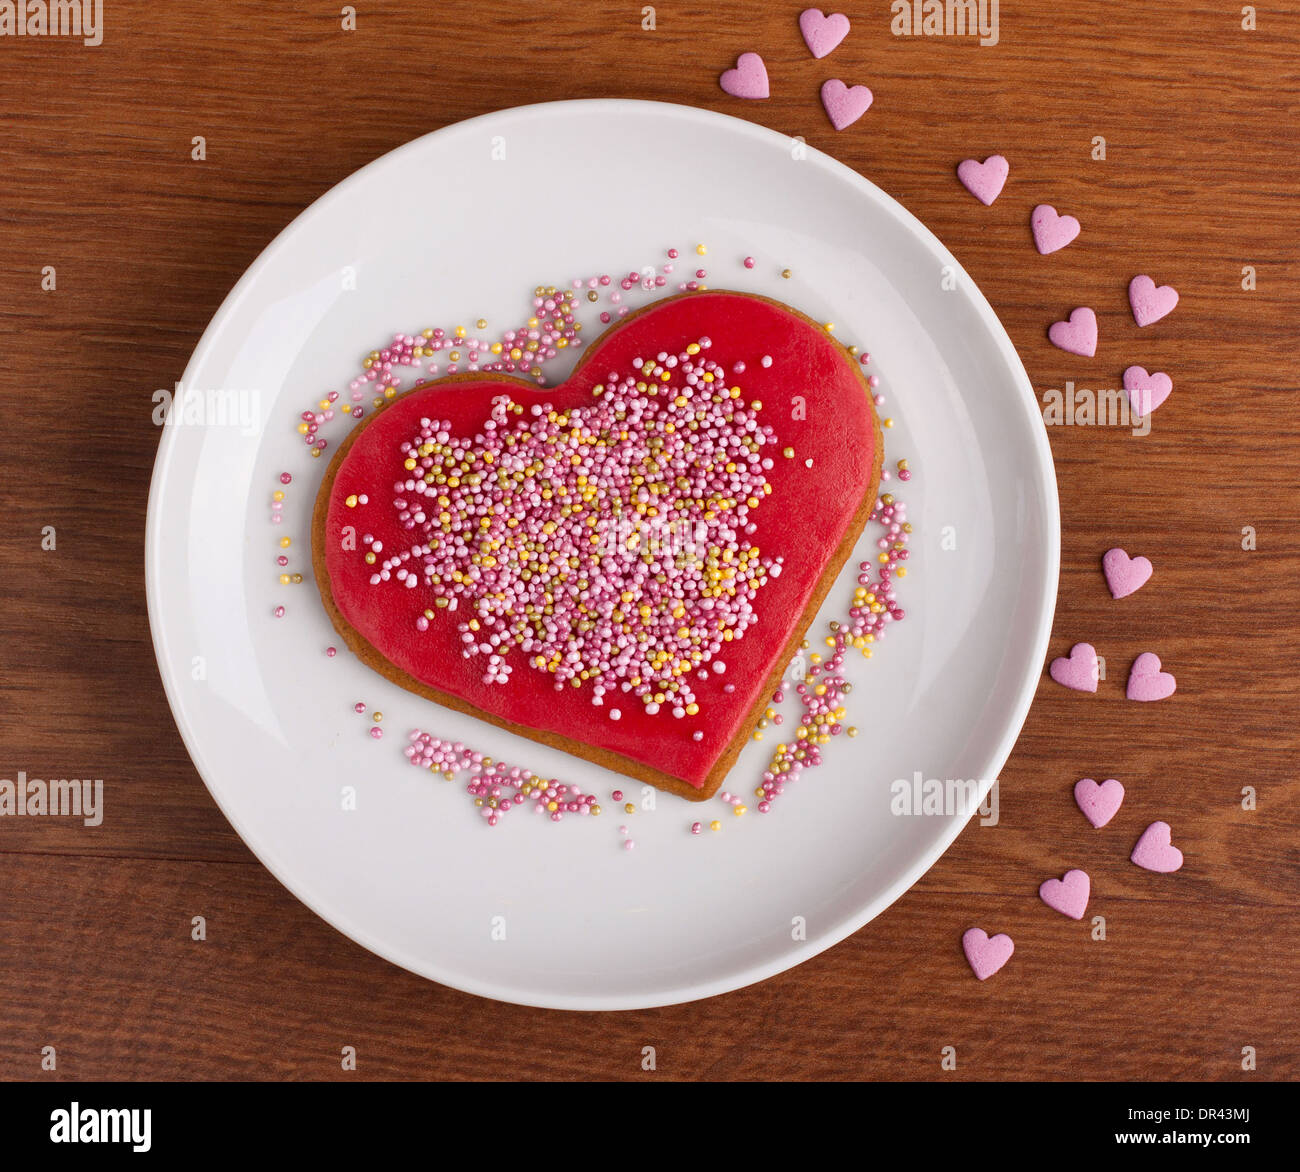 Red marzipan biscuit covered with pink sugar sprinkles Stock Photo